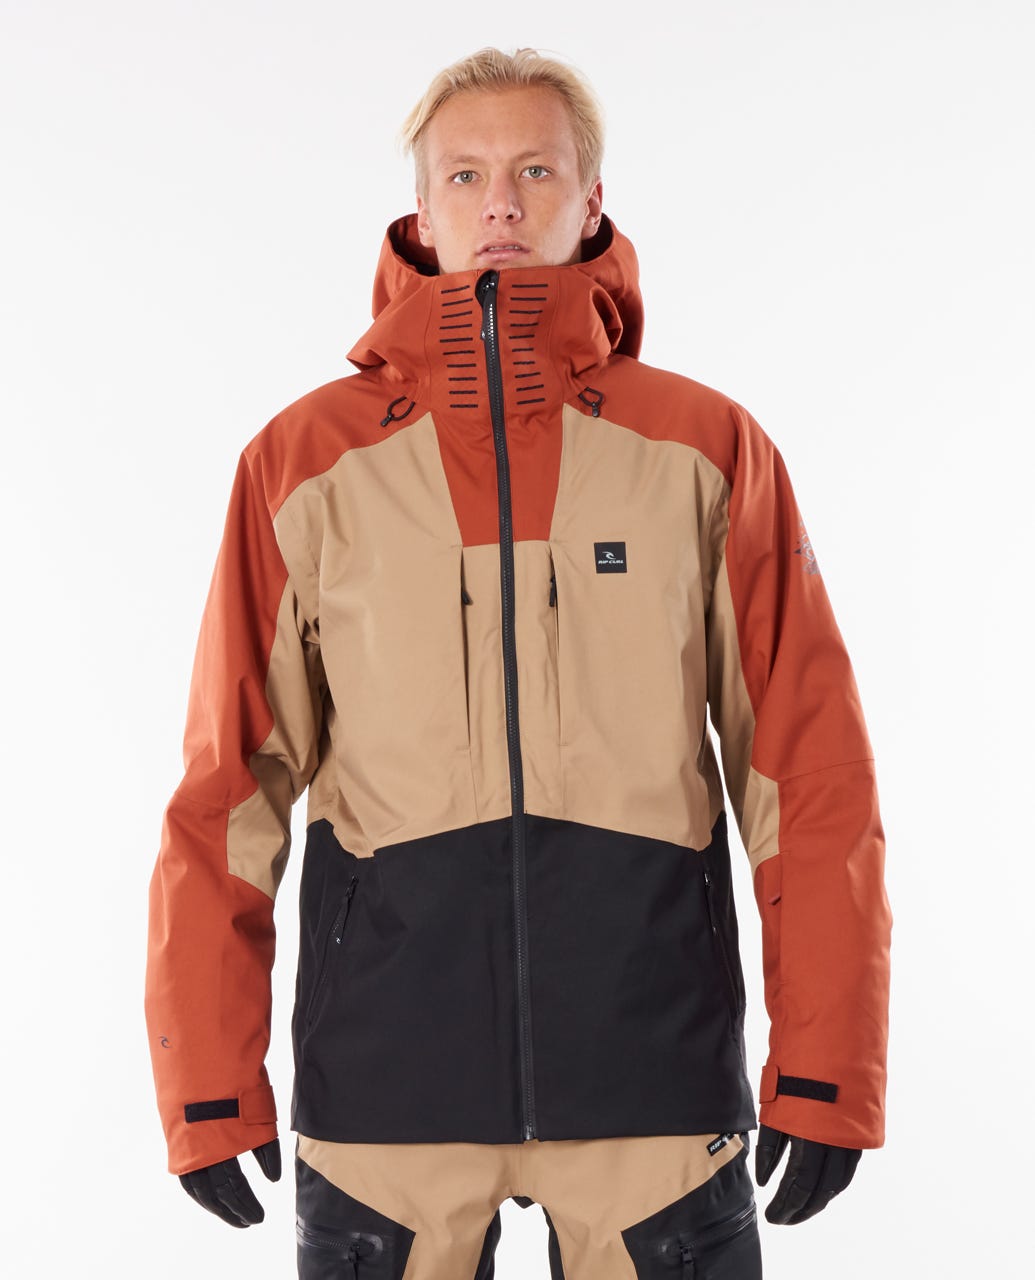 Rip Curl Freeride Search Snow Jacket Yellow